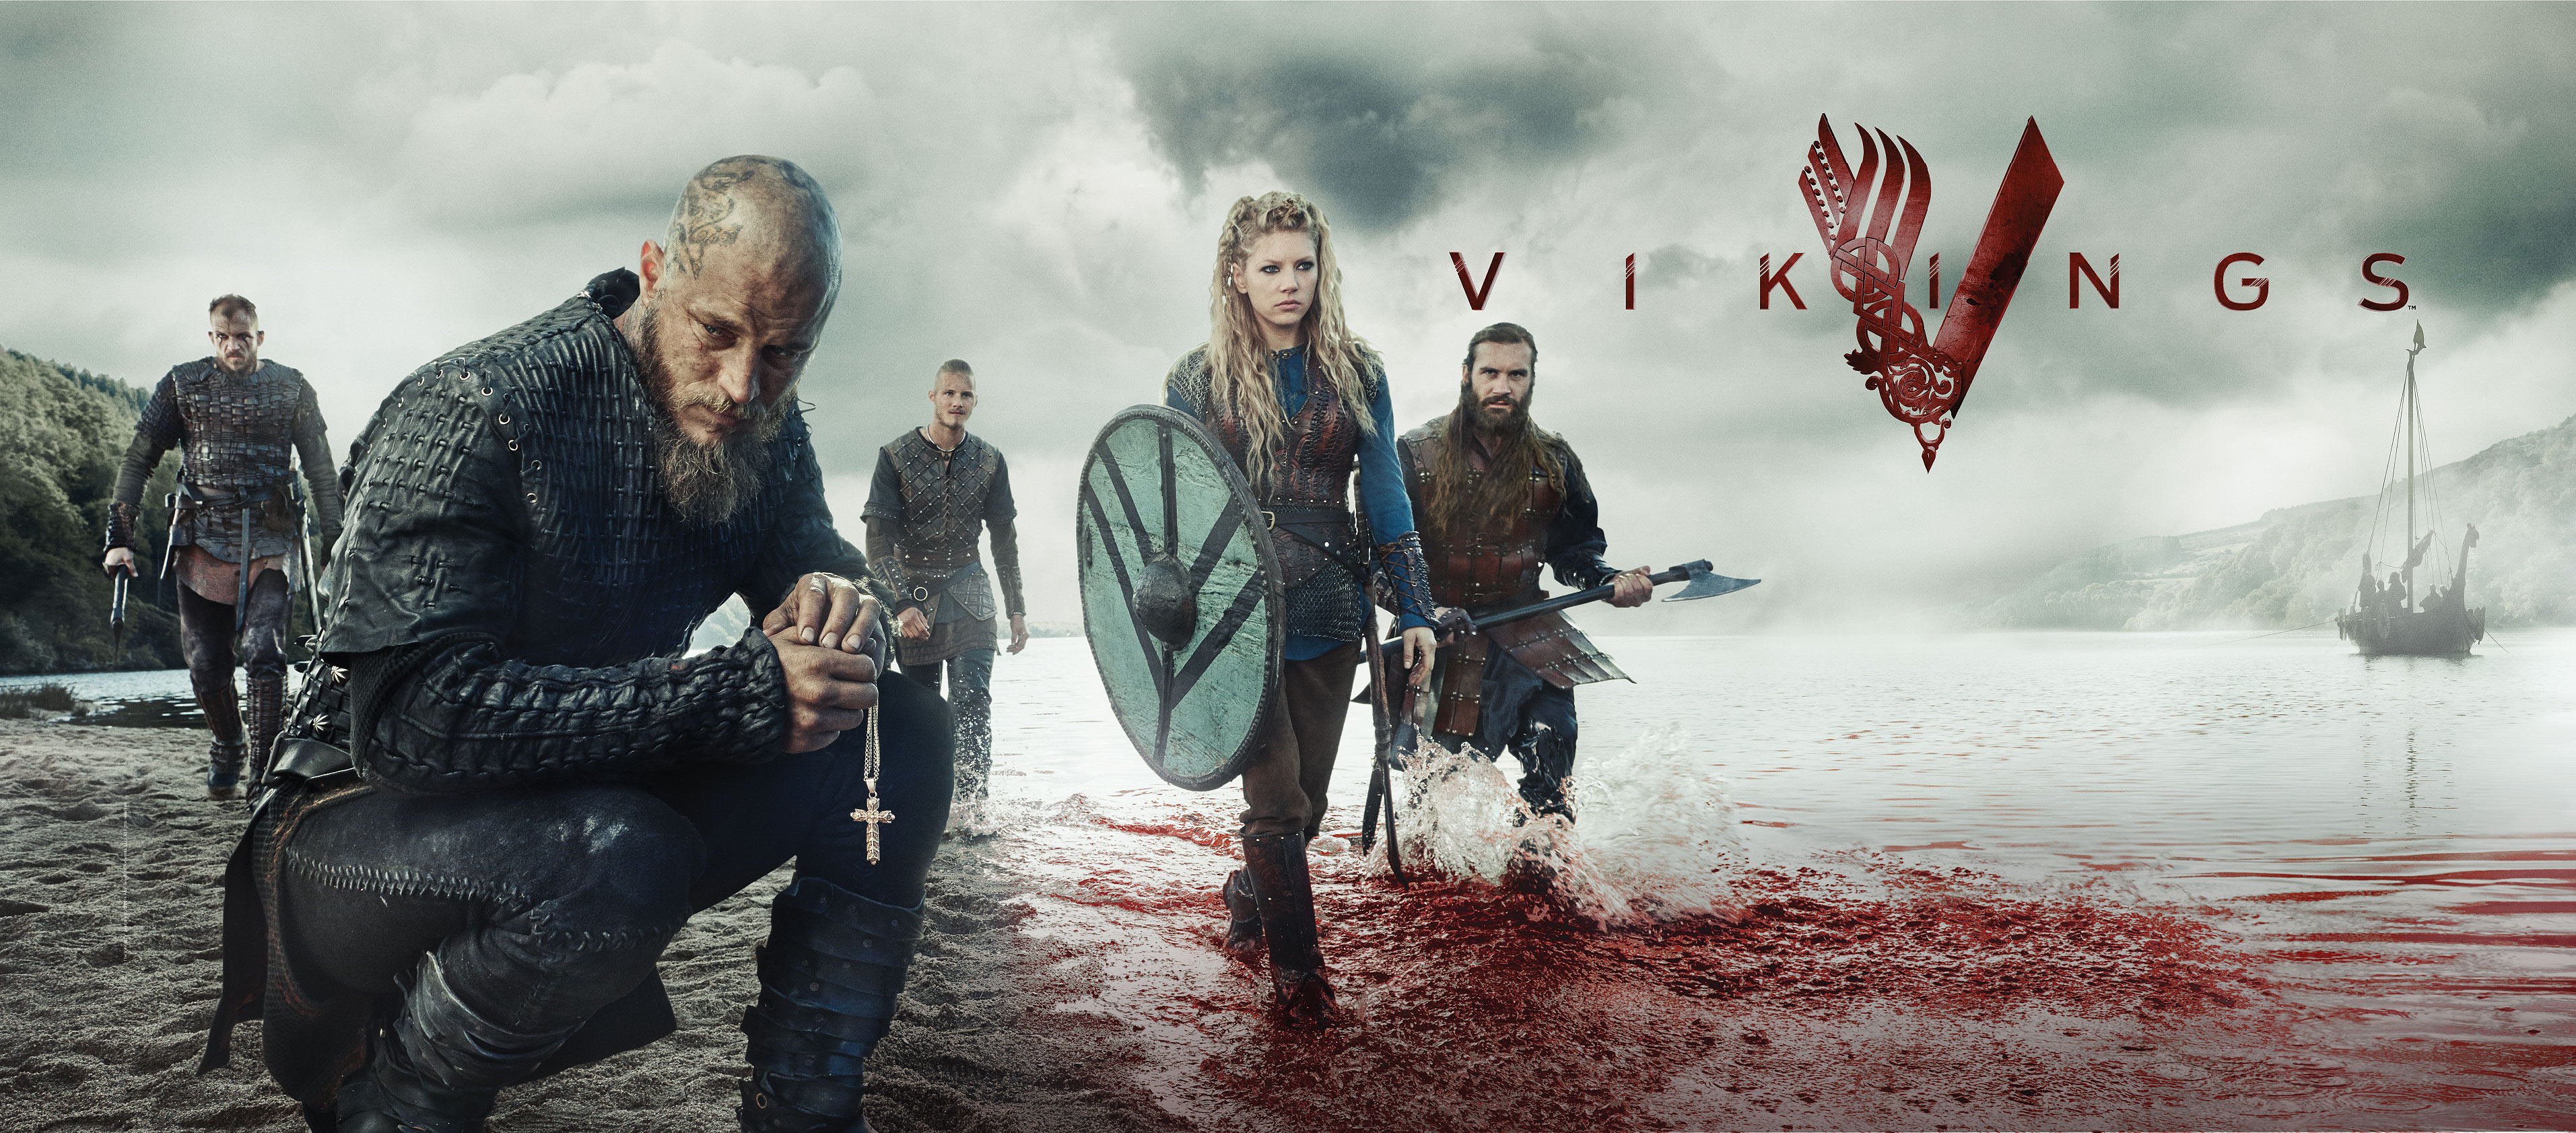 43+ Vikings Wallpapers: HD, 4K, 5K for PC and Mobile | Download free images  for iPhone, Android